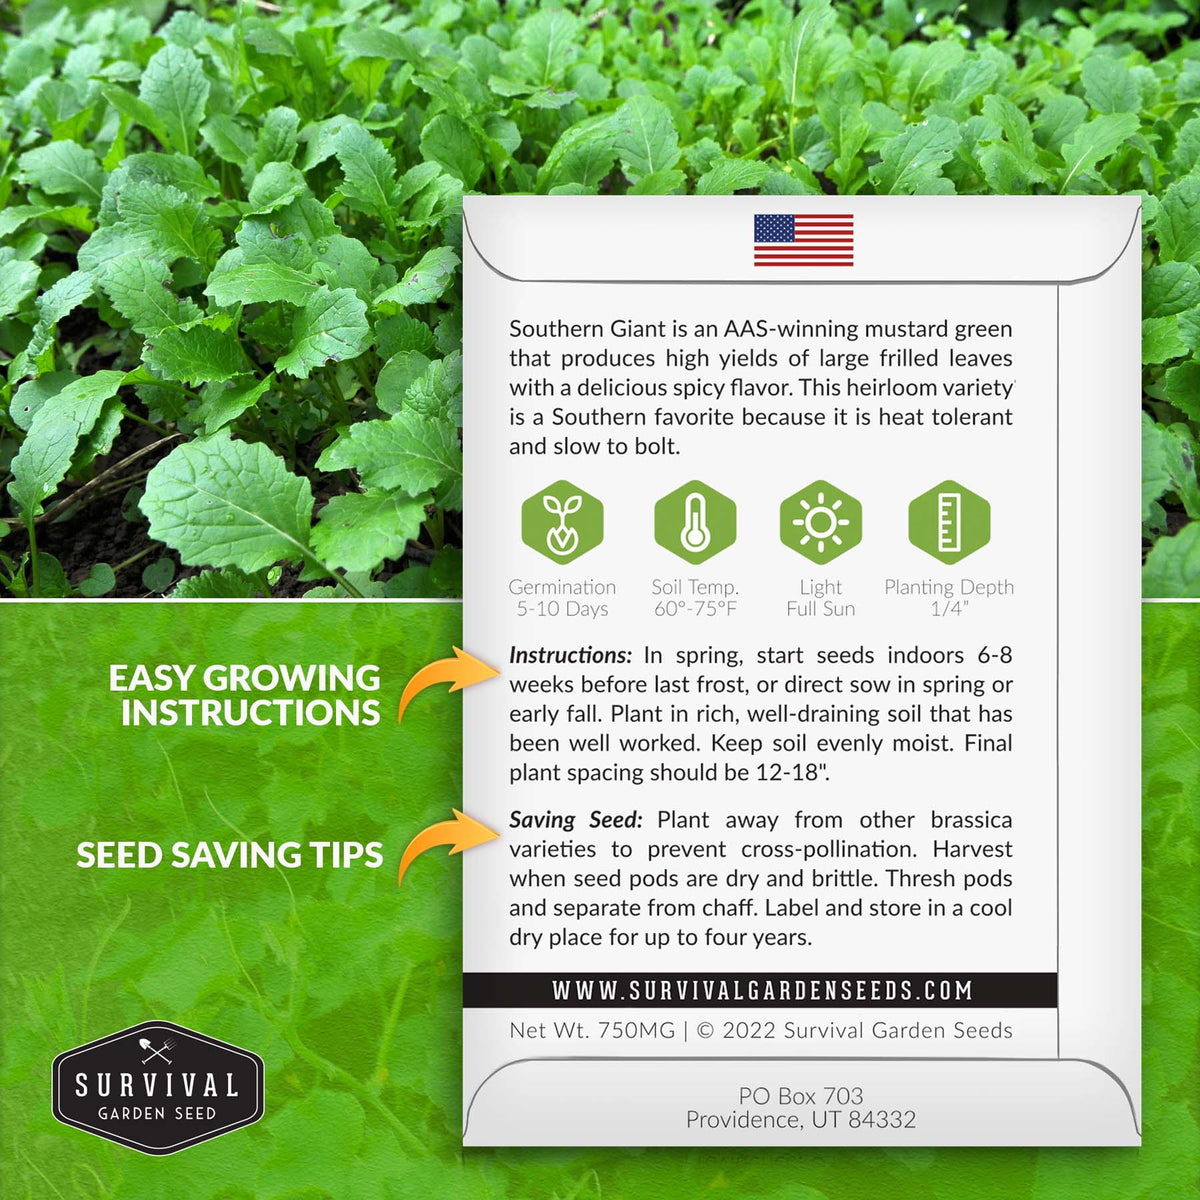 Southern Giant Mustard Greens seed planting instructions